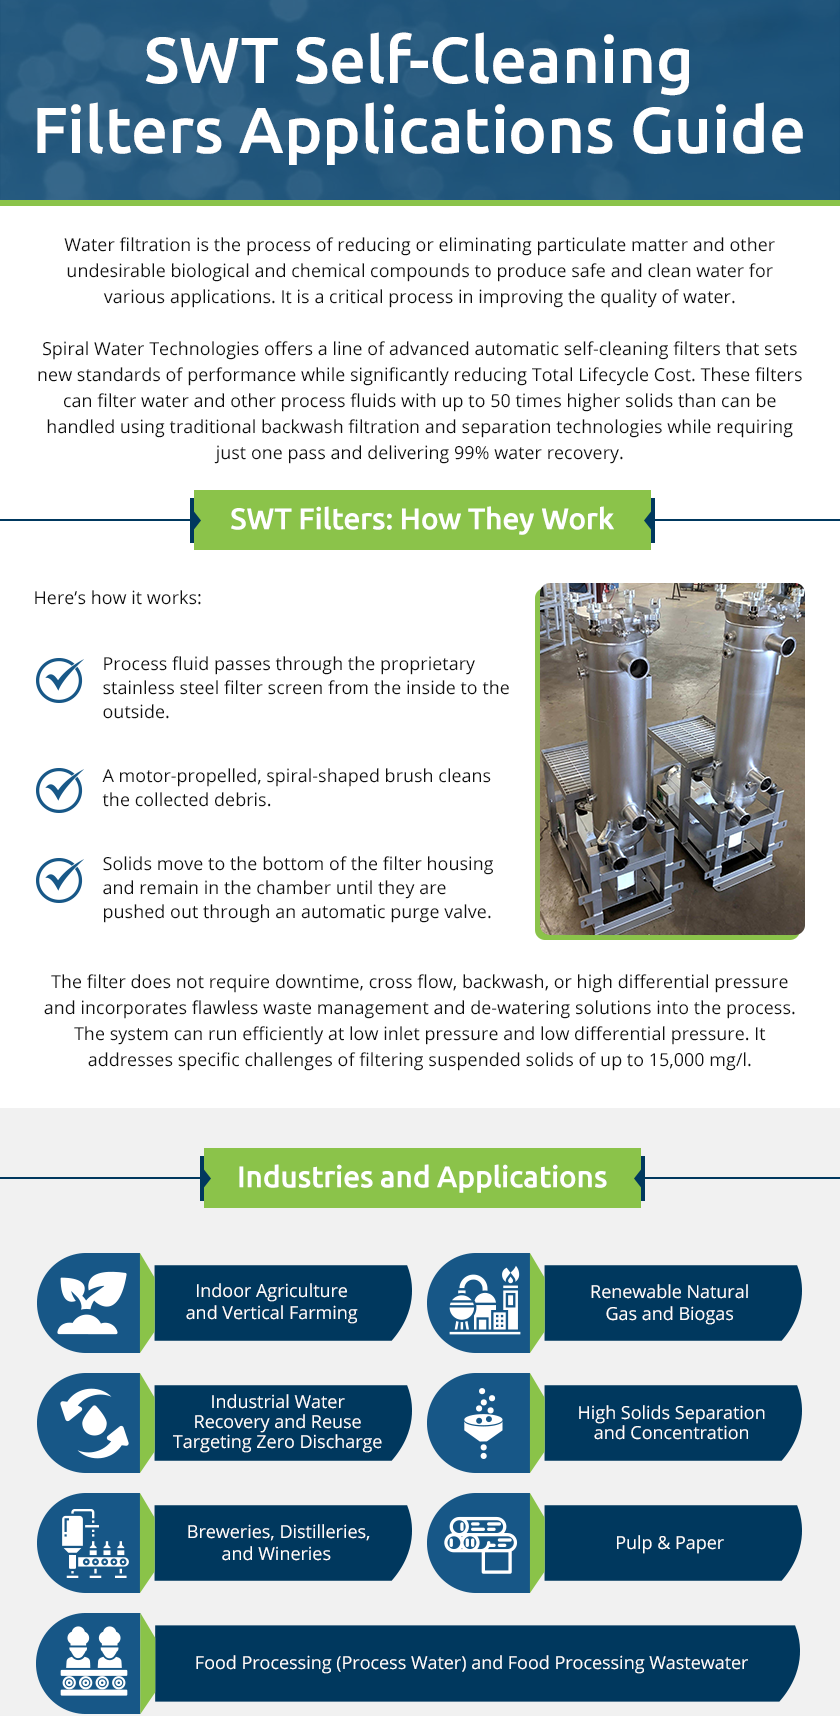 SWT Self-Cleaning Filters Applications Guide